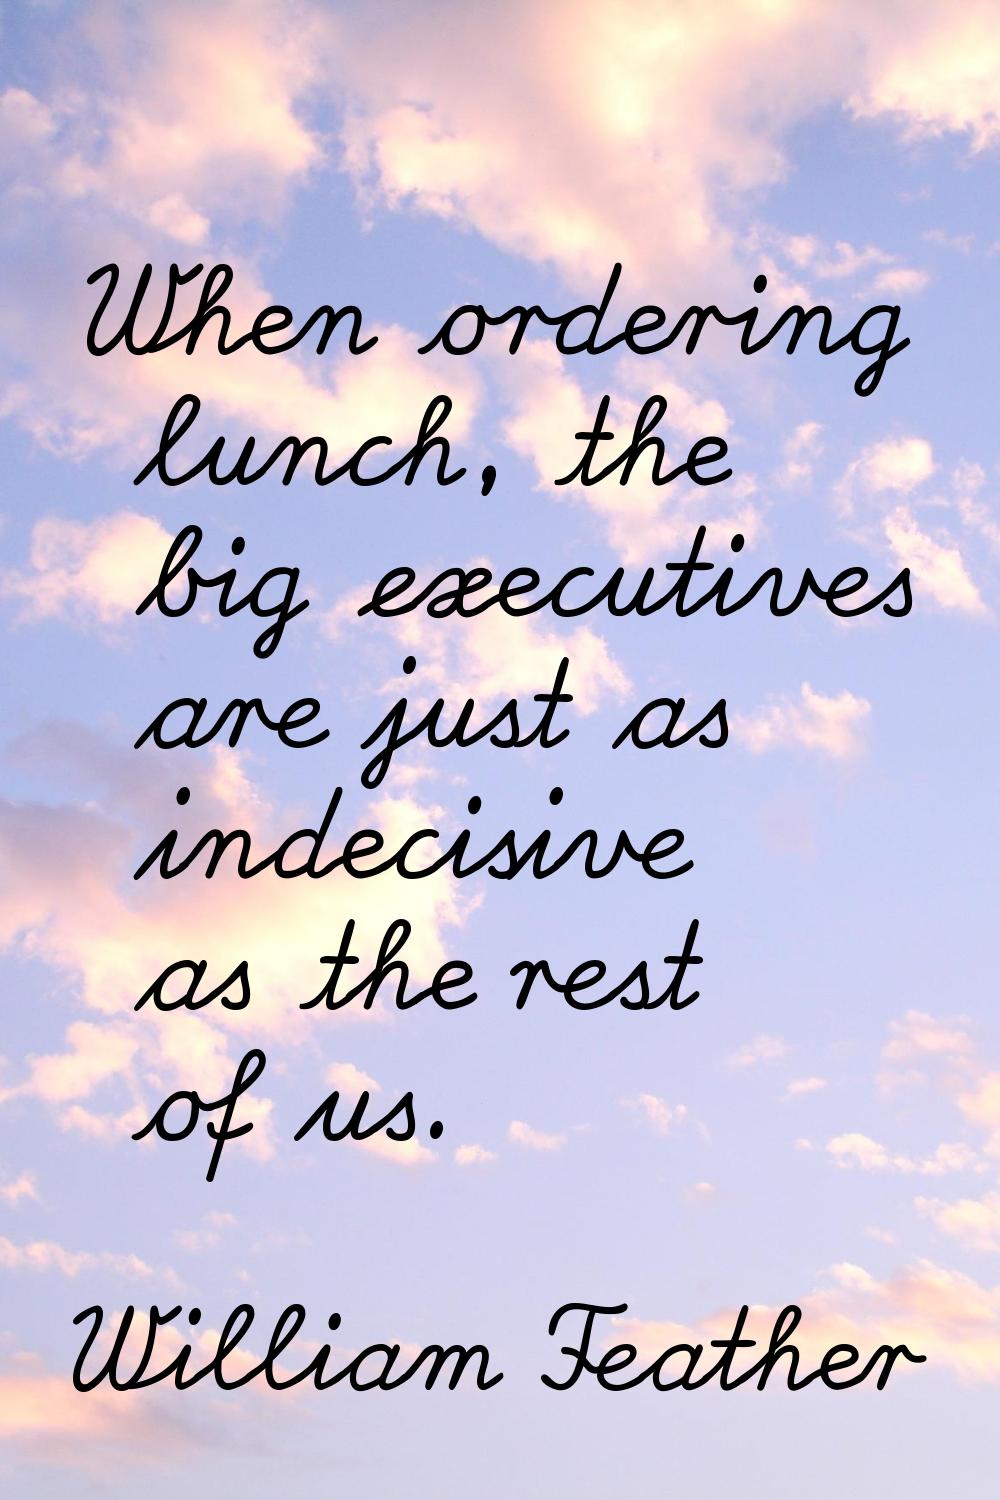 When ordering lunch, the big executives are just as indecisive as the rest of us.